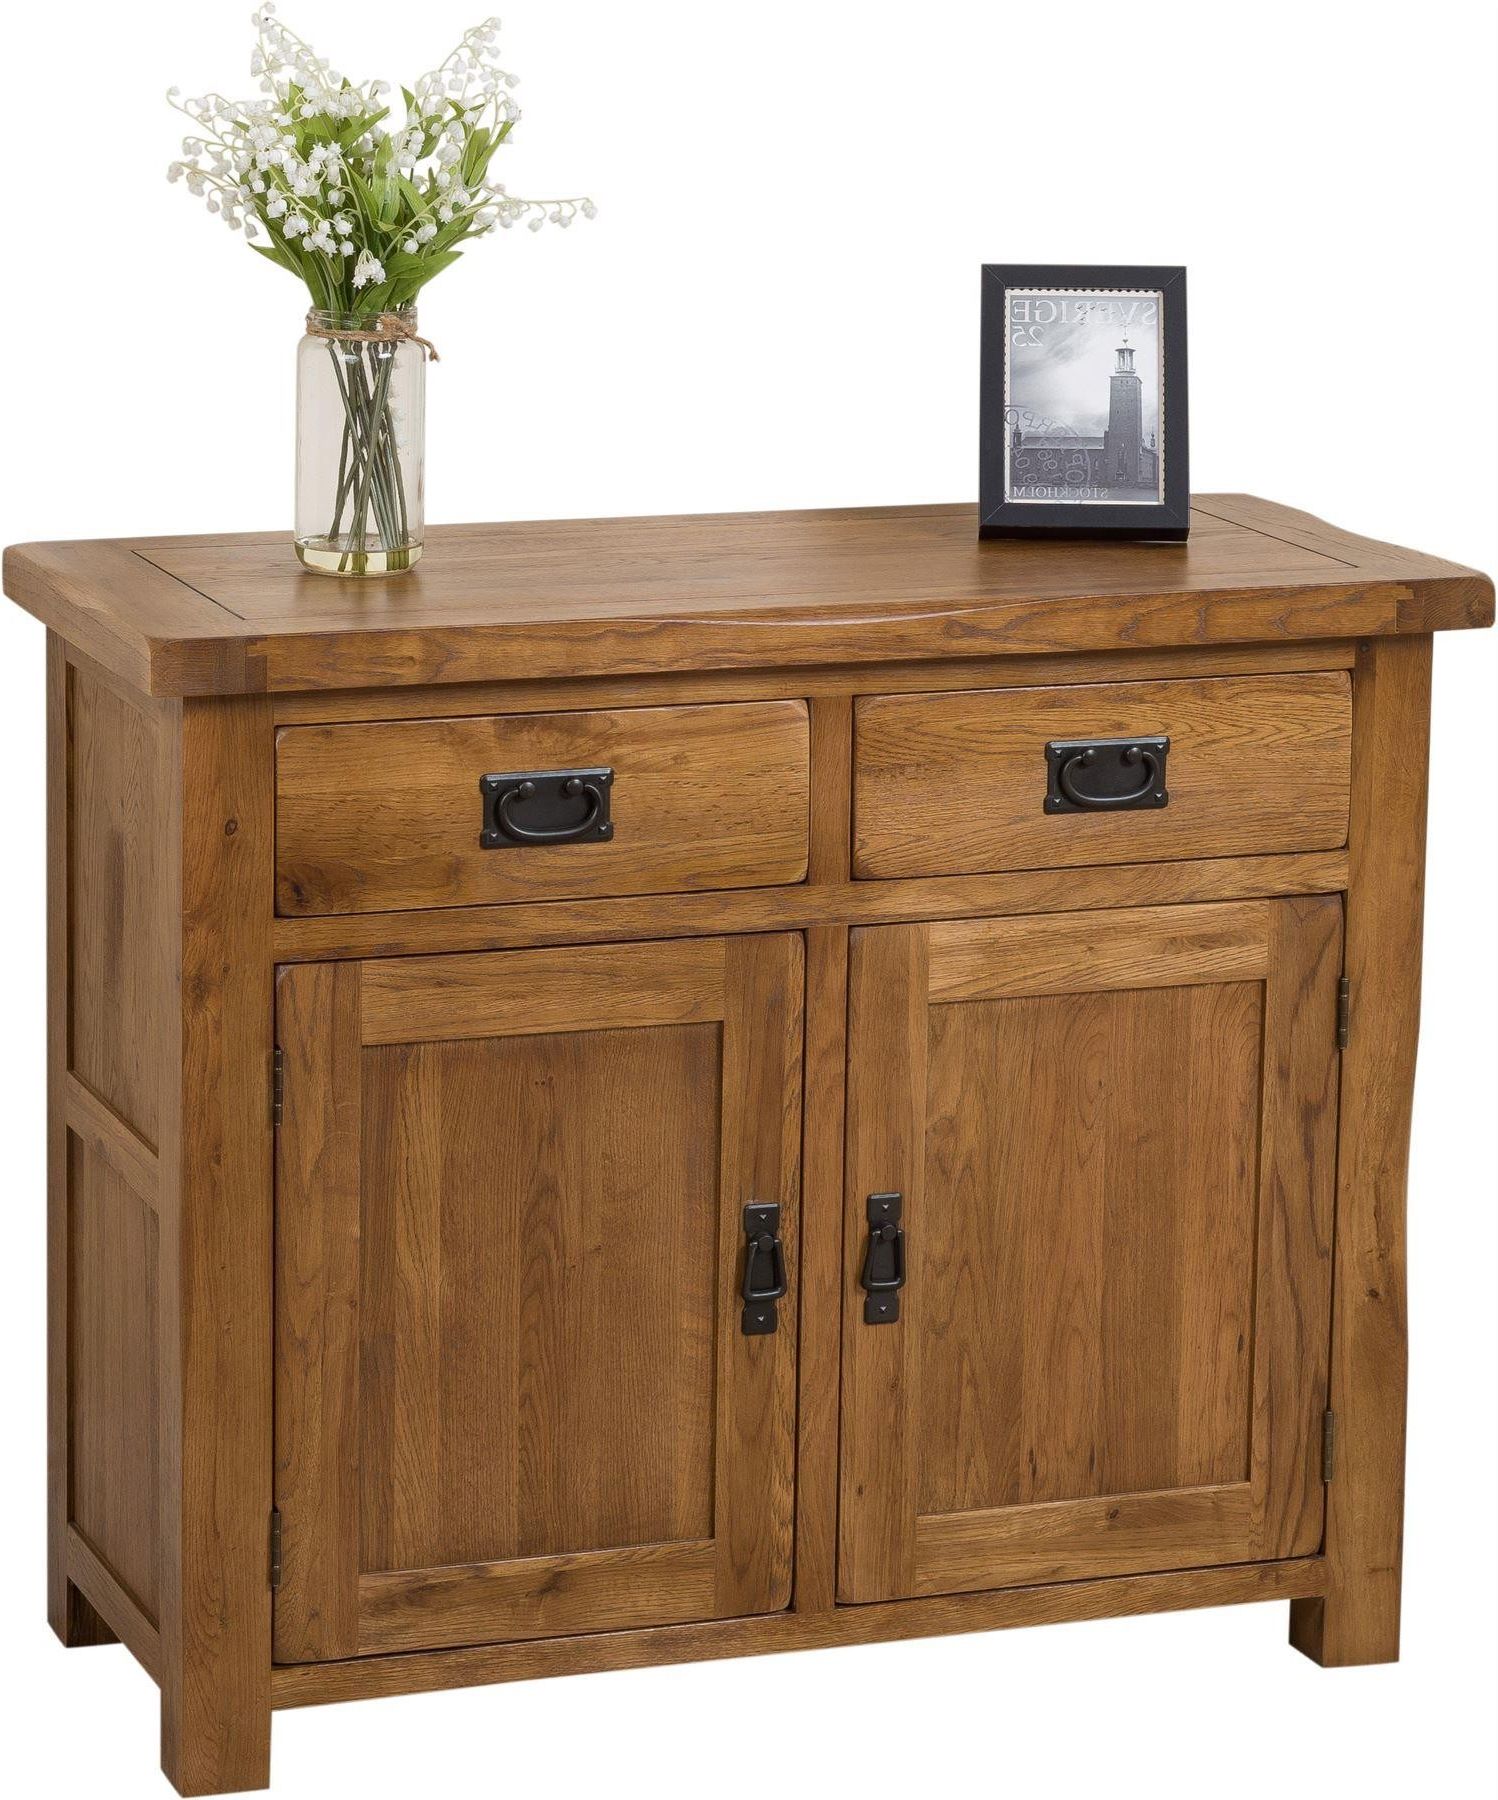 Cotswold Rustic Small Oak Sideboard | Modern Furniture Direct Within Rustic Oak Sideboards (View 6 of 20)